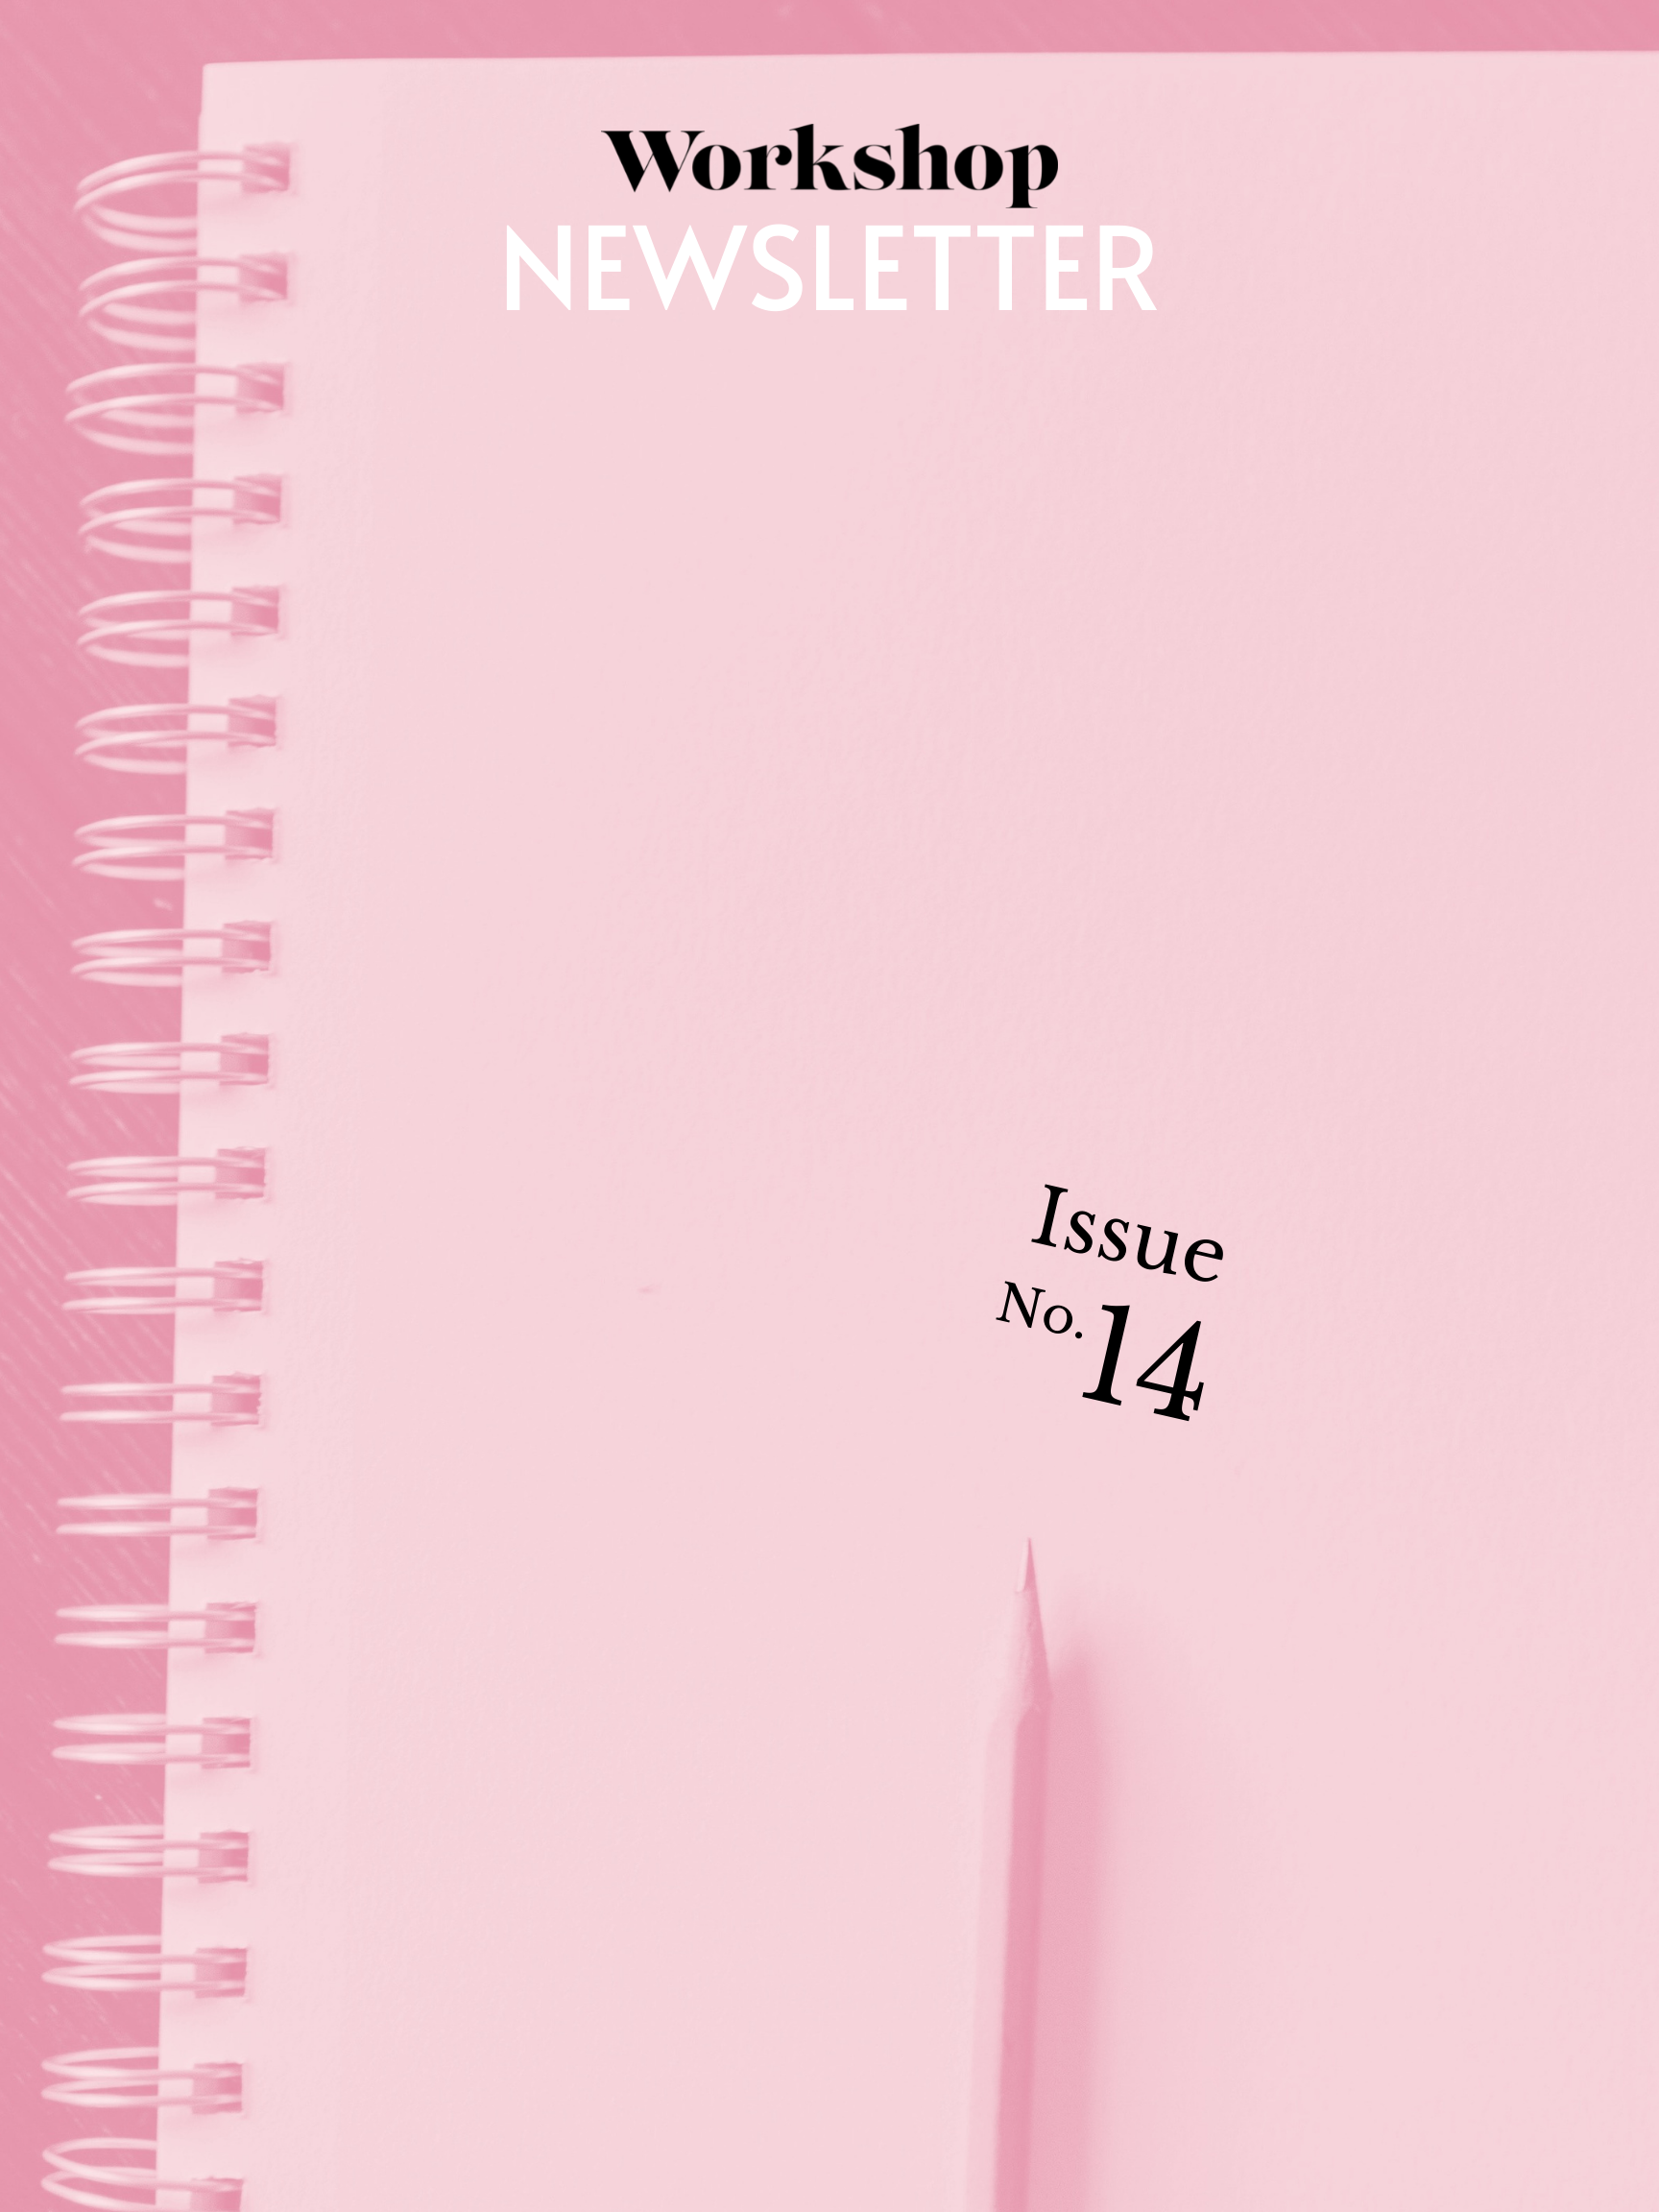 Notebook overlaid in pink, with words "Workshop Newsletter: Issue No. 14"